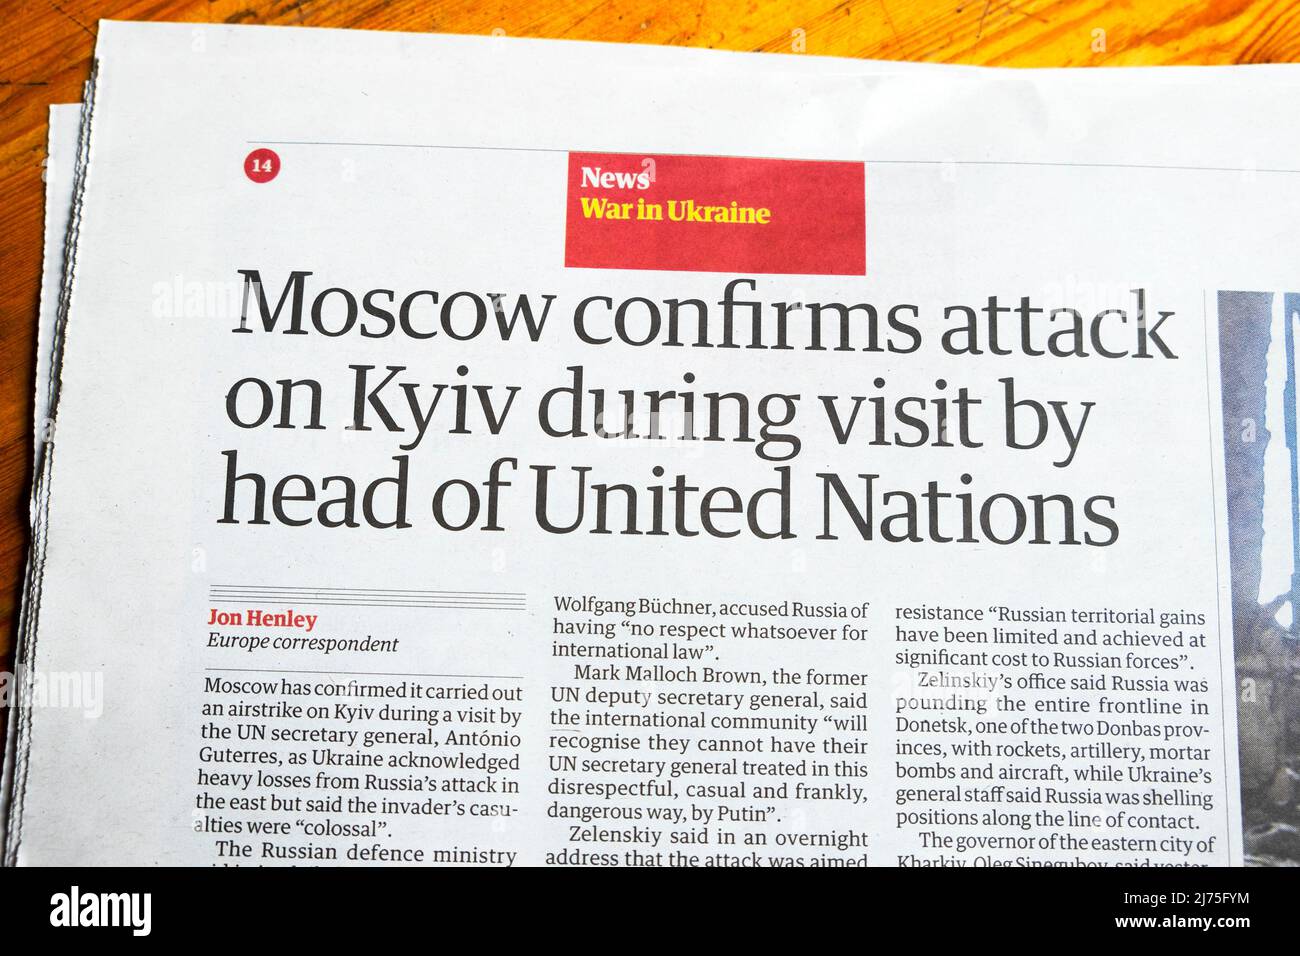 'Moscow confirms attack on Kyiv during visit by head of United Nations' Guardian newspaper headline Ukraine war clipping on 29 April 2022 London UK Stock Photo